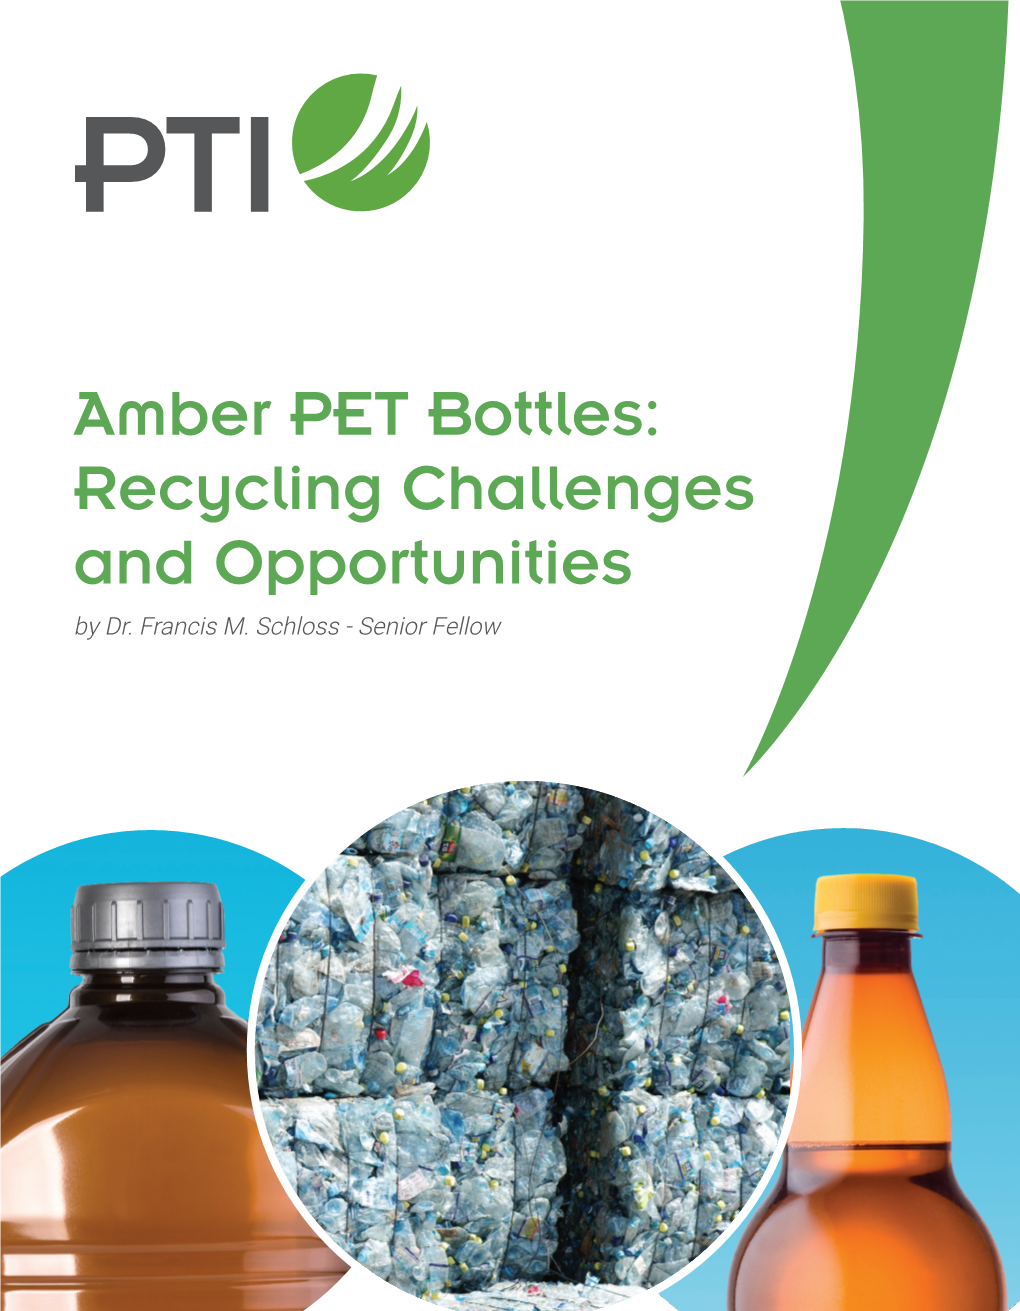 Amber PET Bottles: Recycling Challenges and Opportunities by Dr